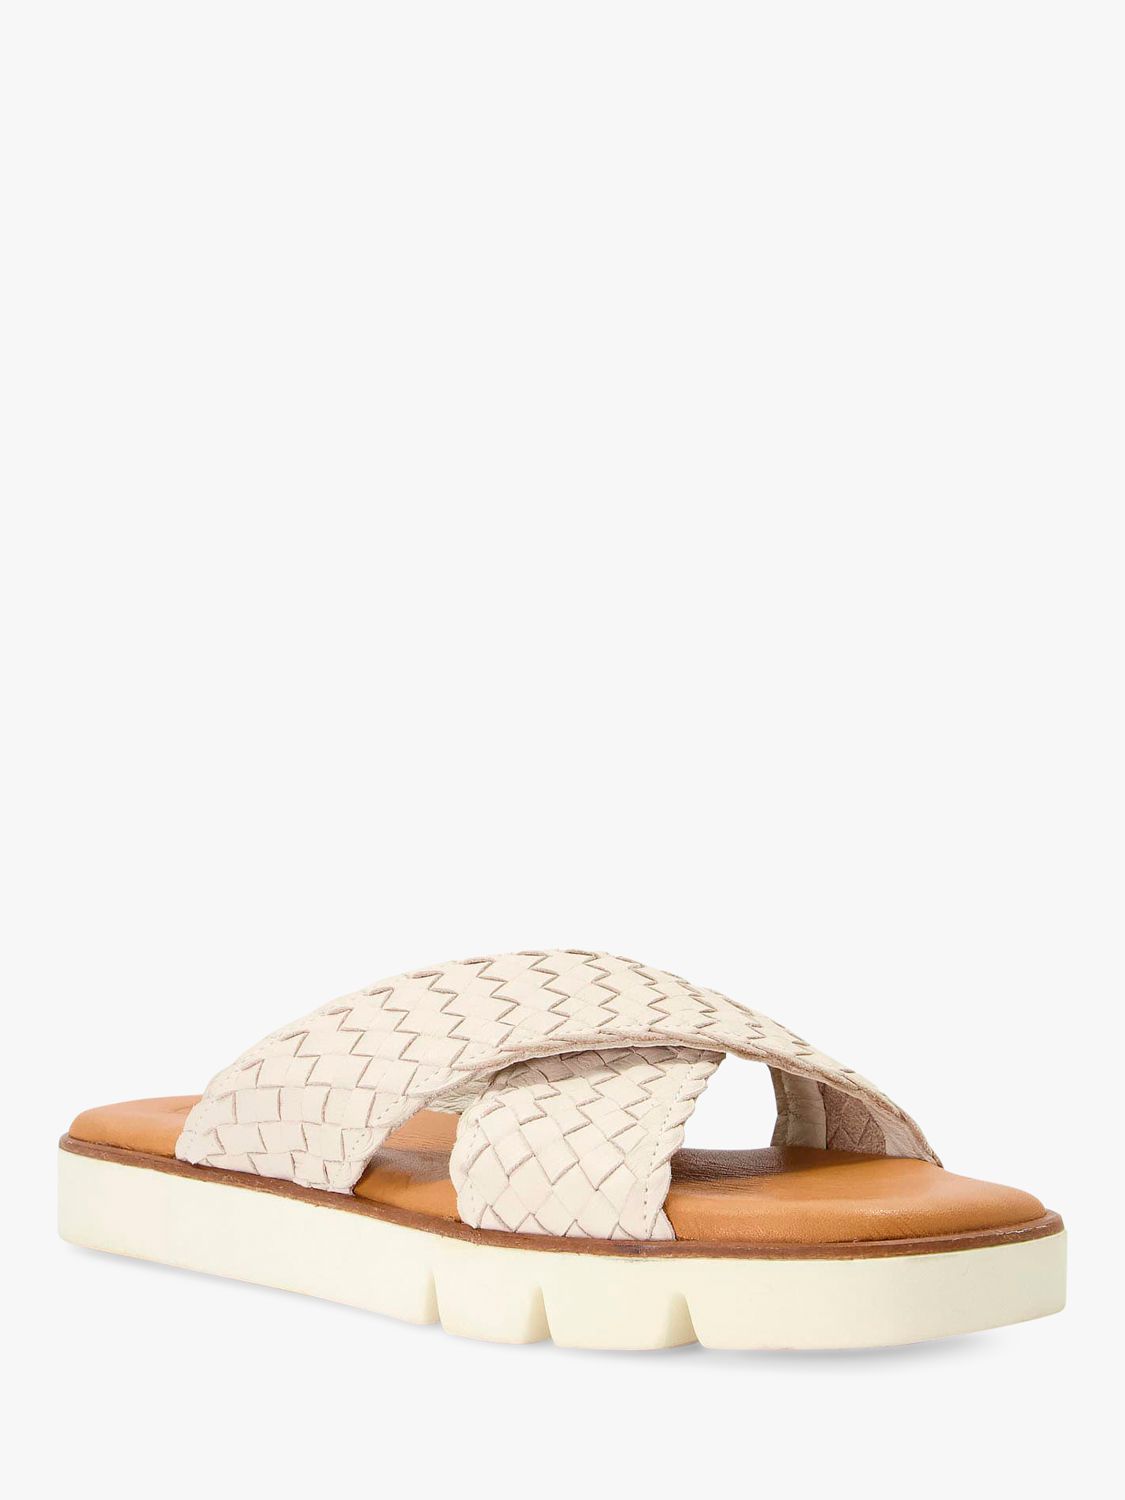 Buy Dune Lexey Leather Woven Strap Cross Over Sandals Online at johnlewis.com